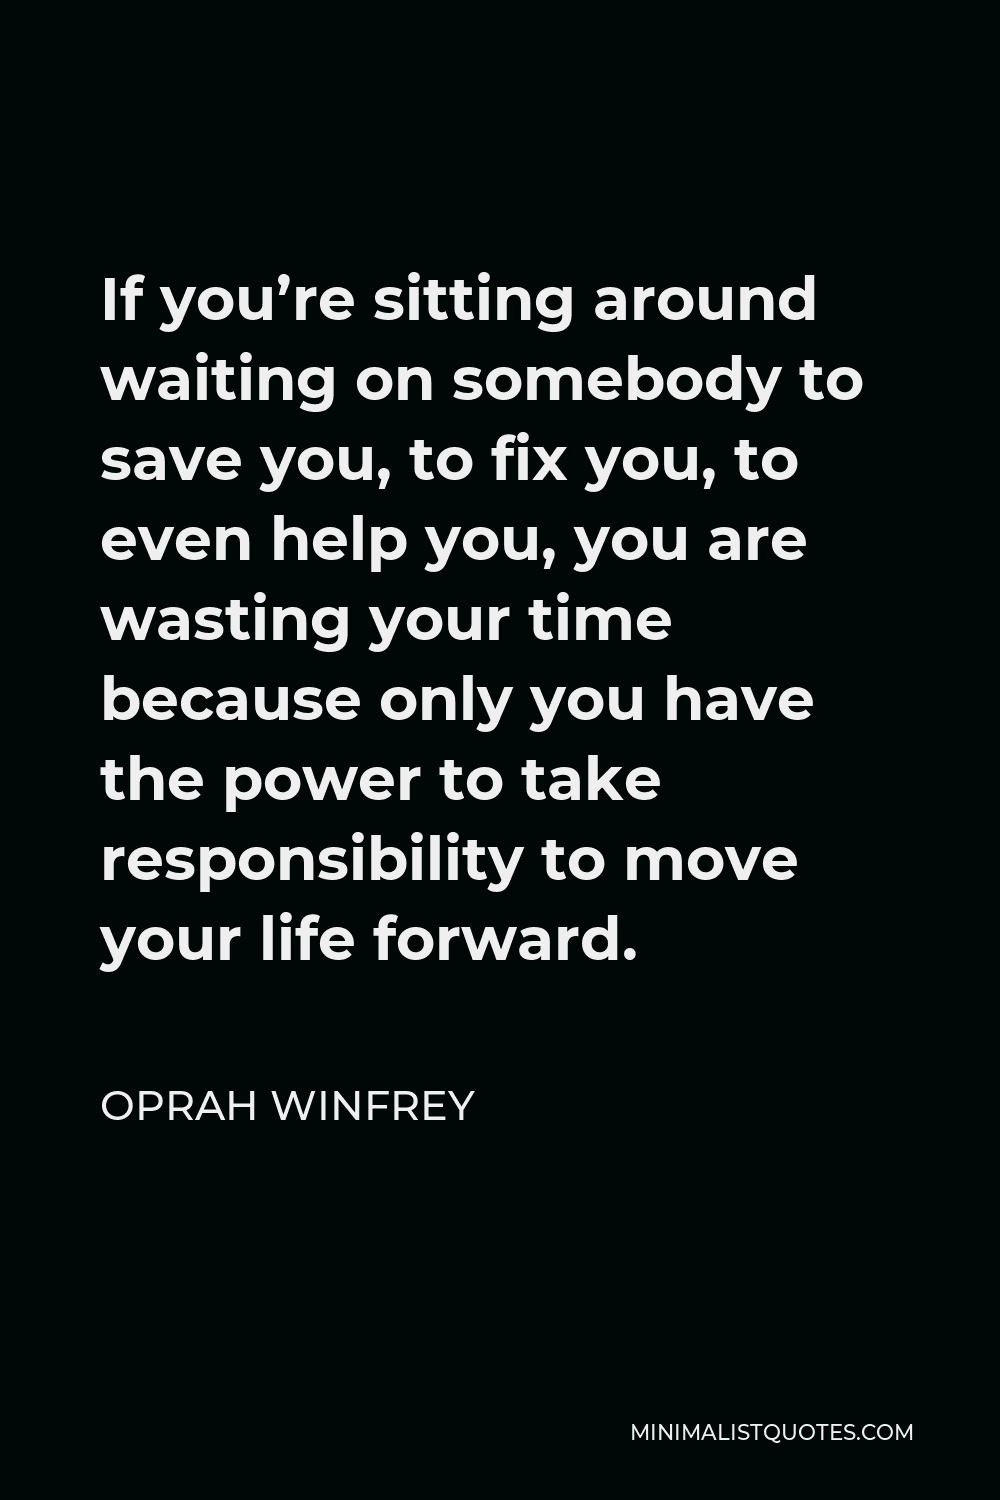 Oprah Winfrey Quote - If you’re sitting around waiting on somebody to save you, to fix you, to even help you, you are wasting your time because only you have the power to take responsibility to move your life forward.